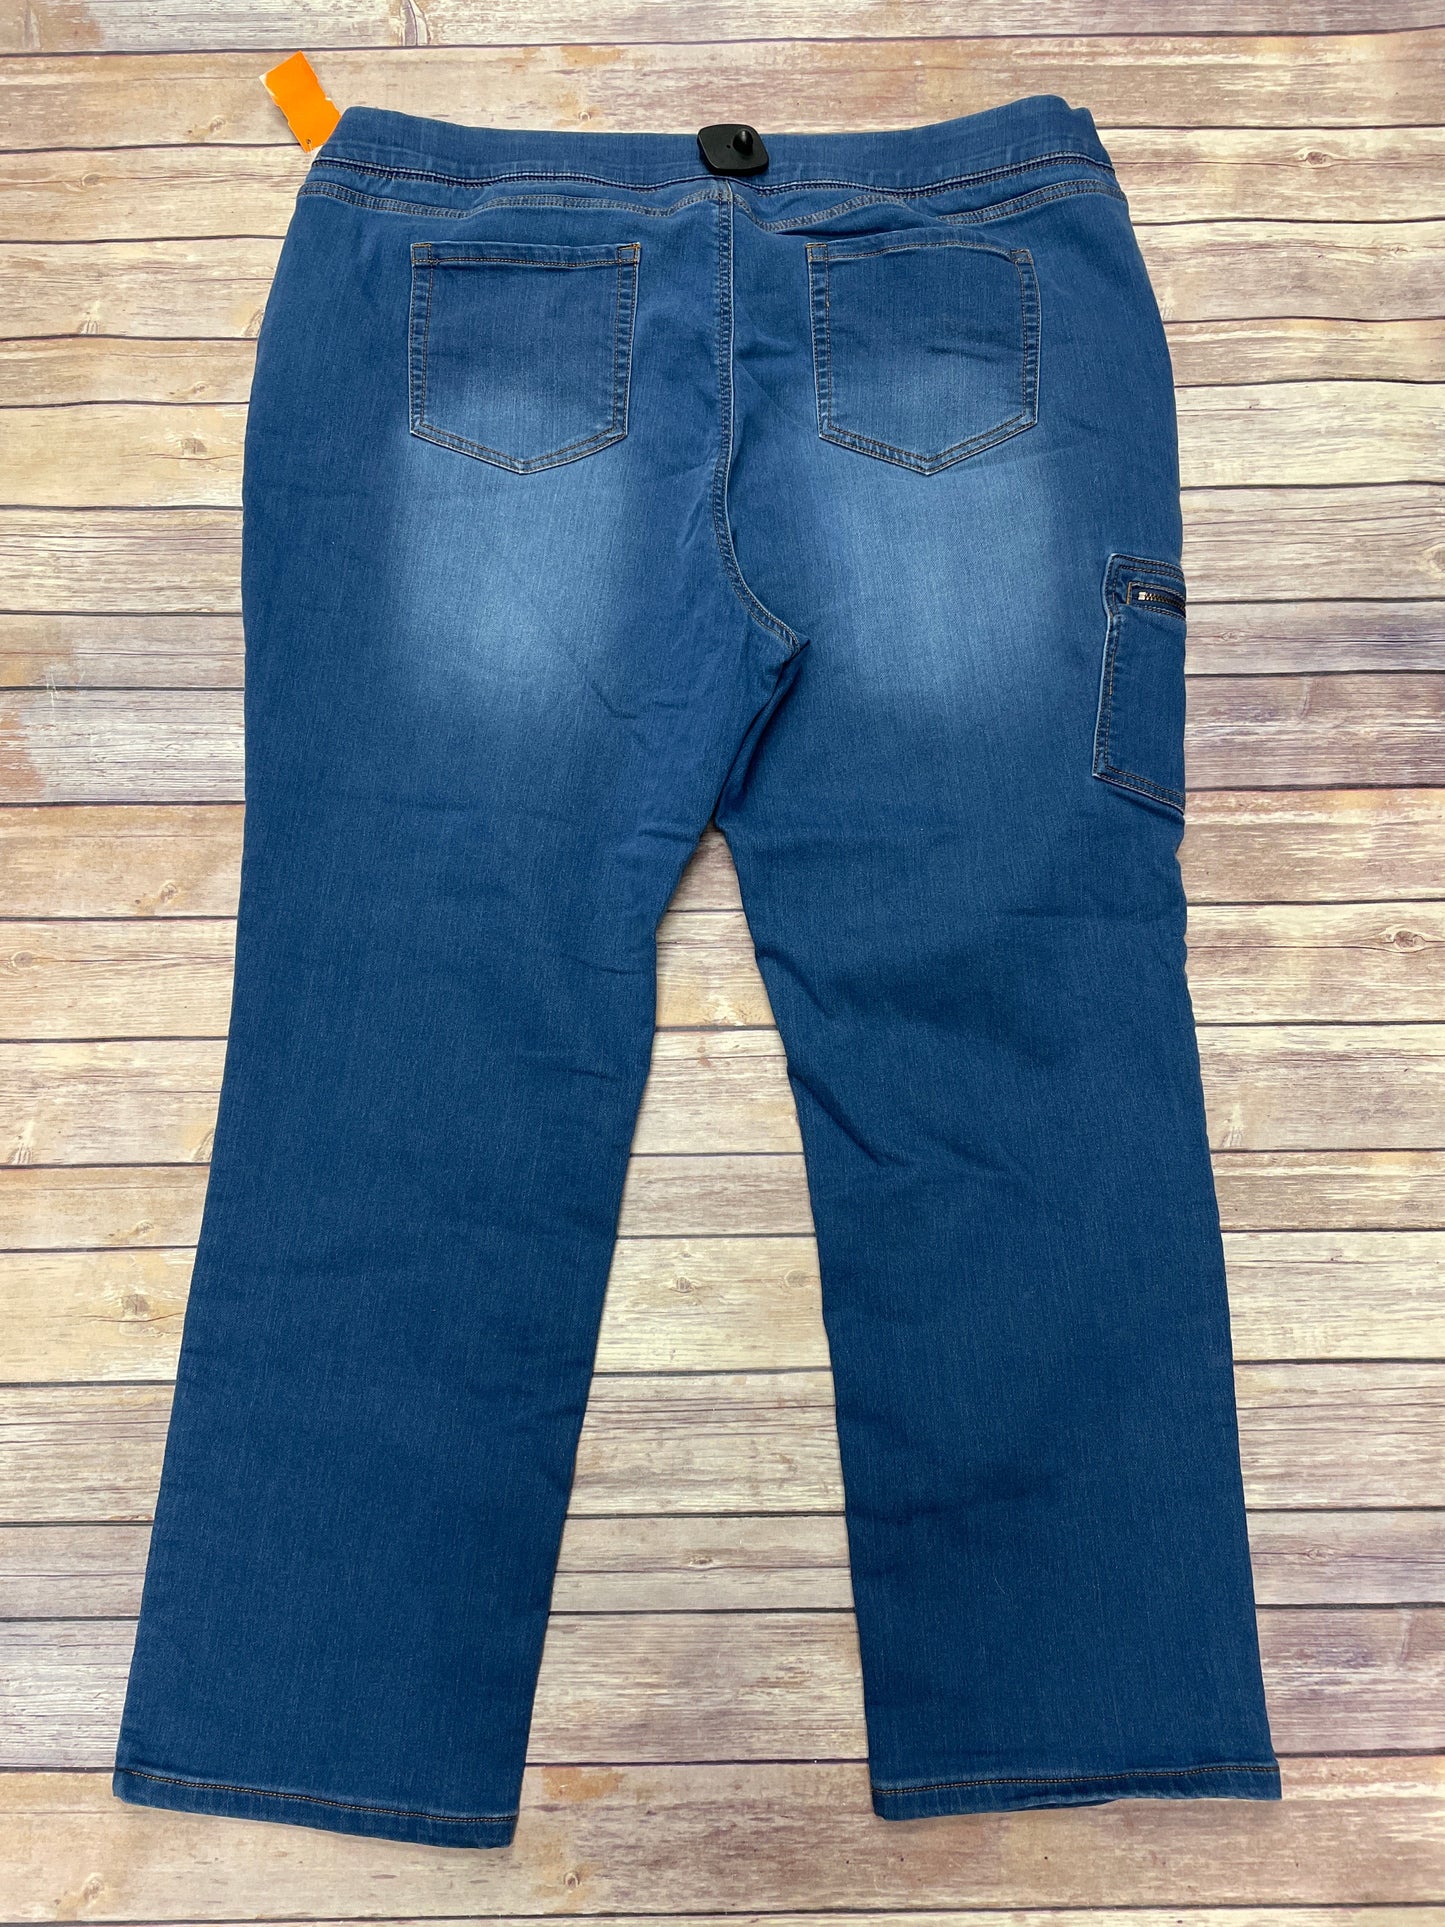 Jeans Skinny By Denim And Company  Size: 2X